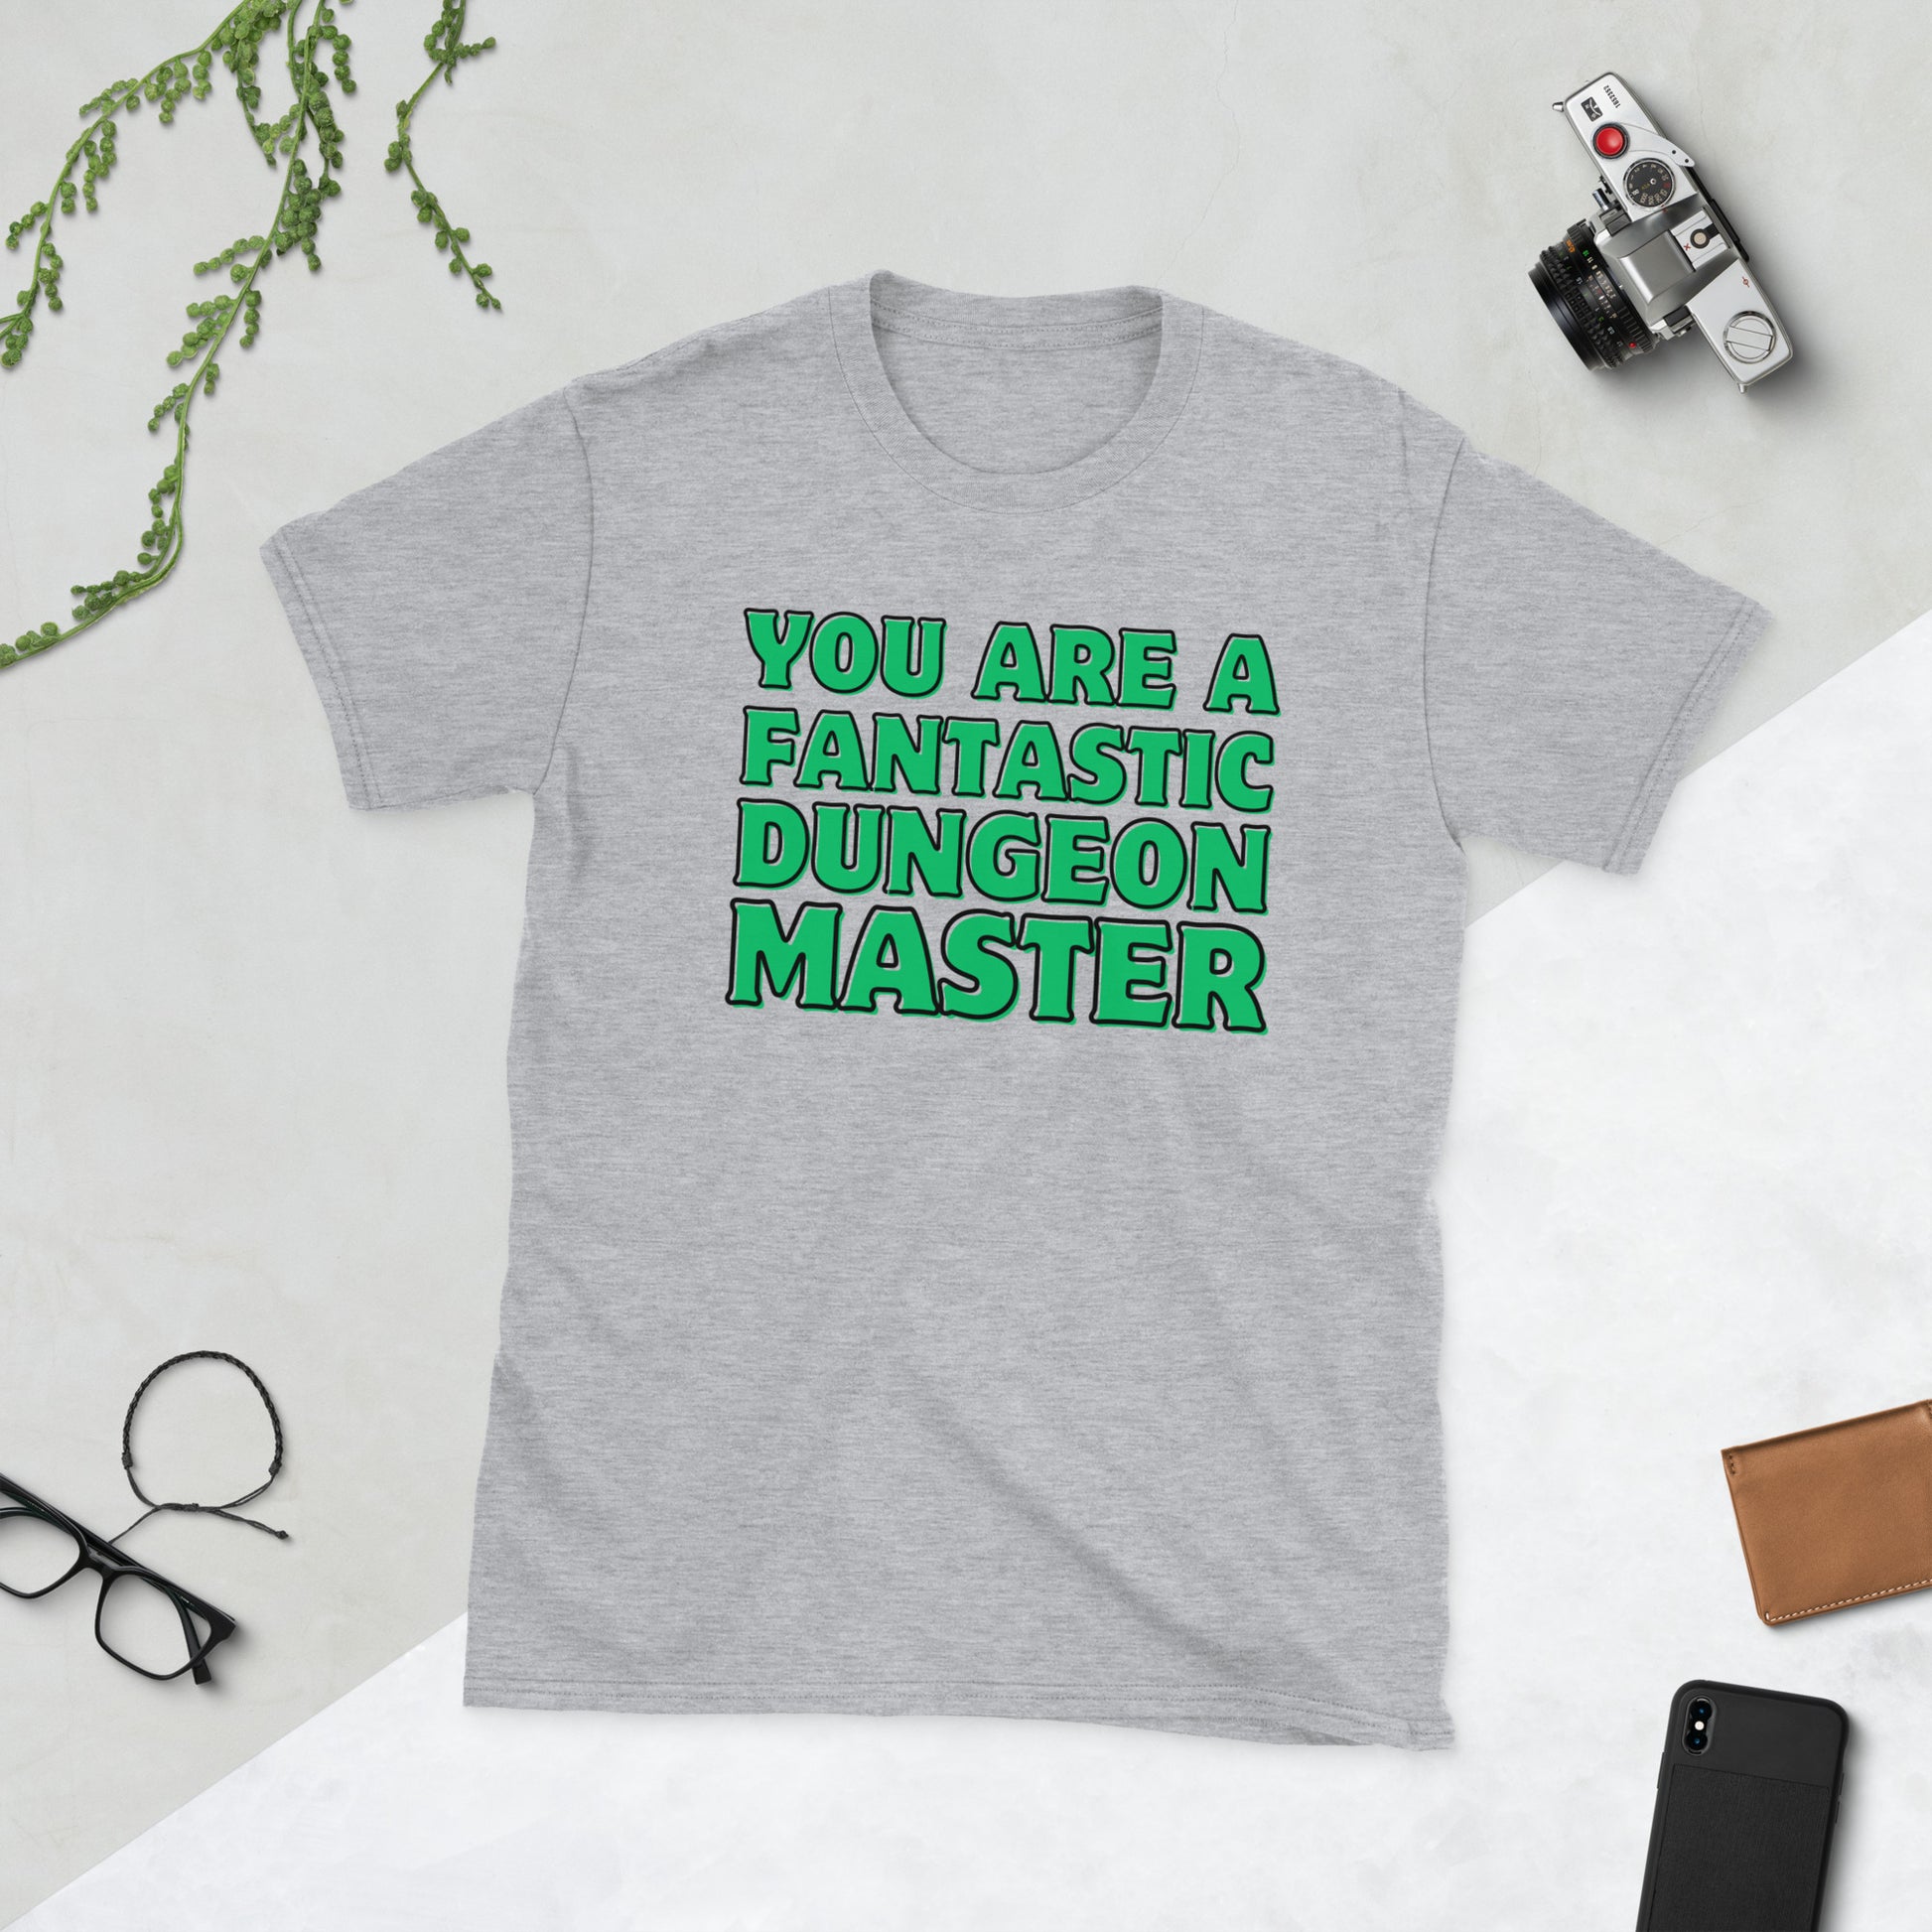 You are a fantastic dungeon master Short-Sleeve Unisex T-Shirt  Level 1 Gamers Sport Grey S 